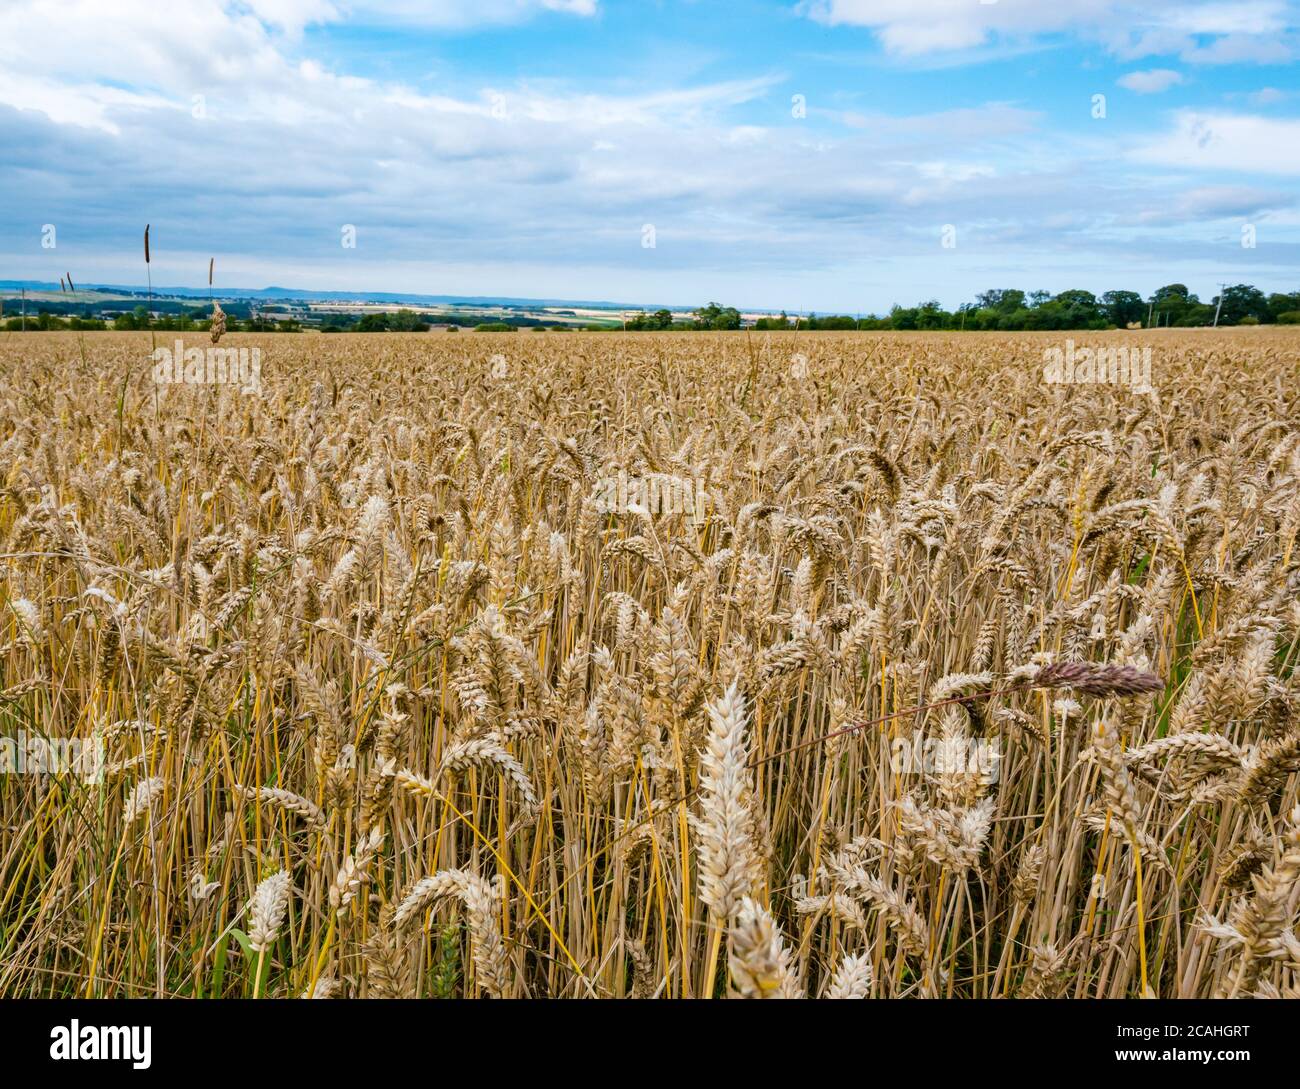 Agricultural Summer landscape with wheat cereal crop growing in a field, East Lothian, Scotland, UK Stock Photo